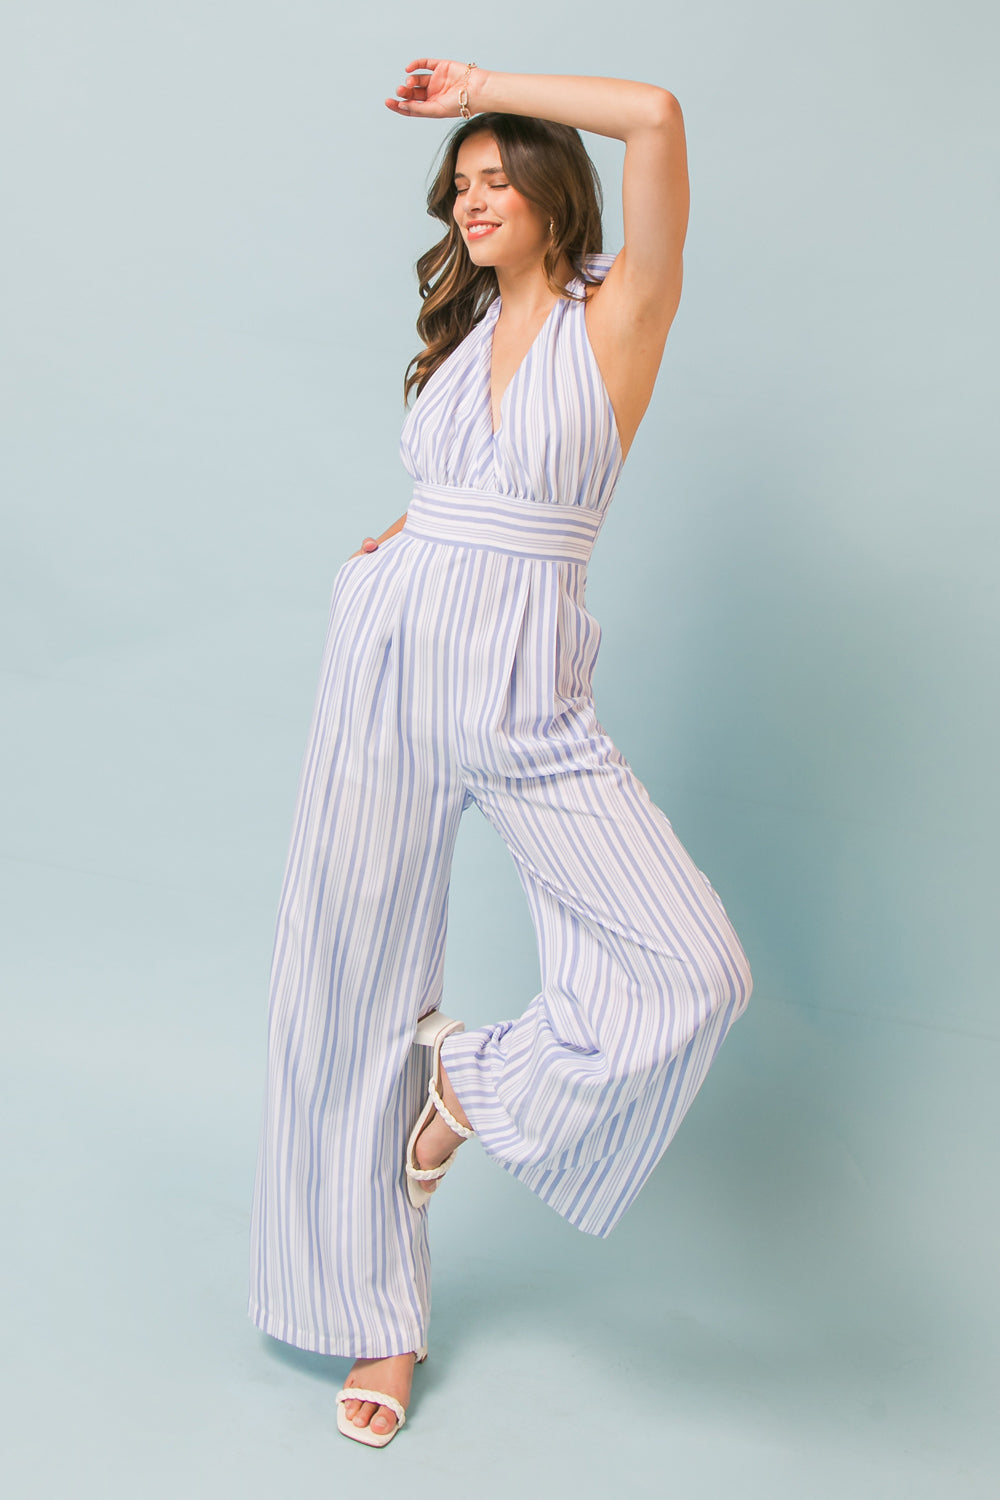 ABSOLUTE EDGE WOVEN JUMPSUIT